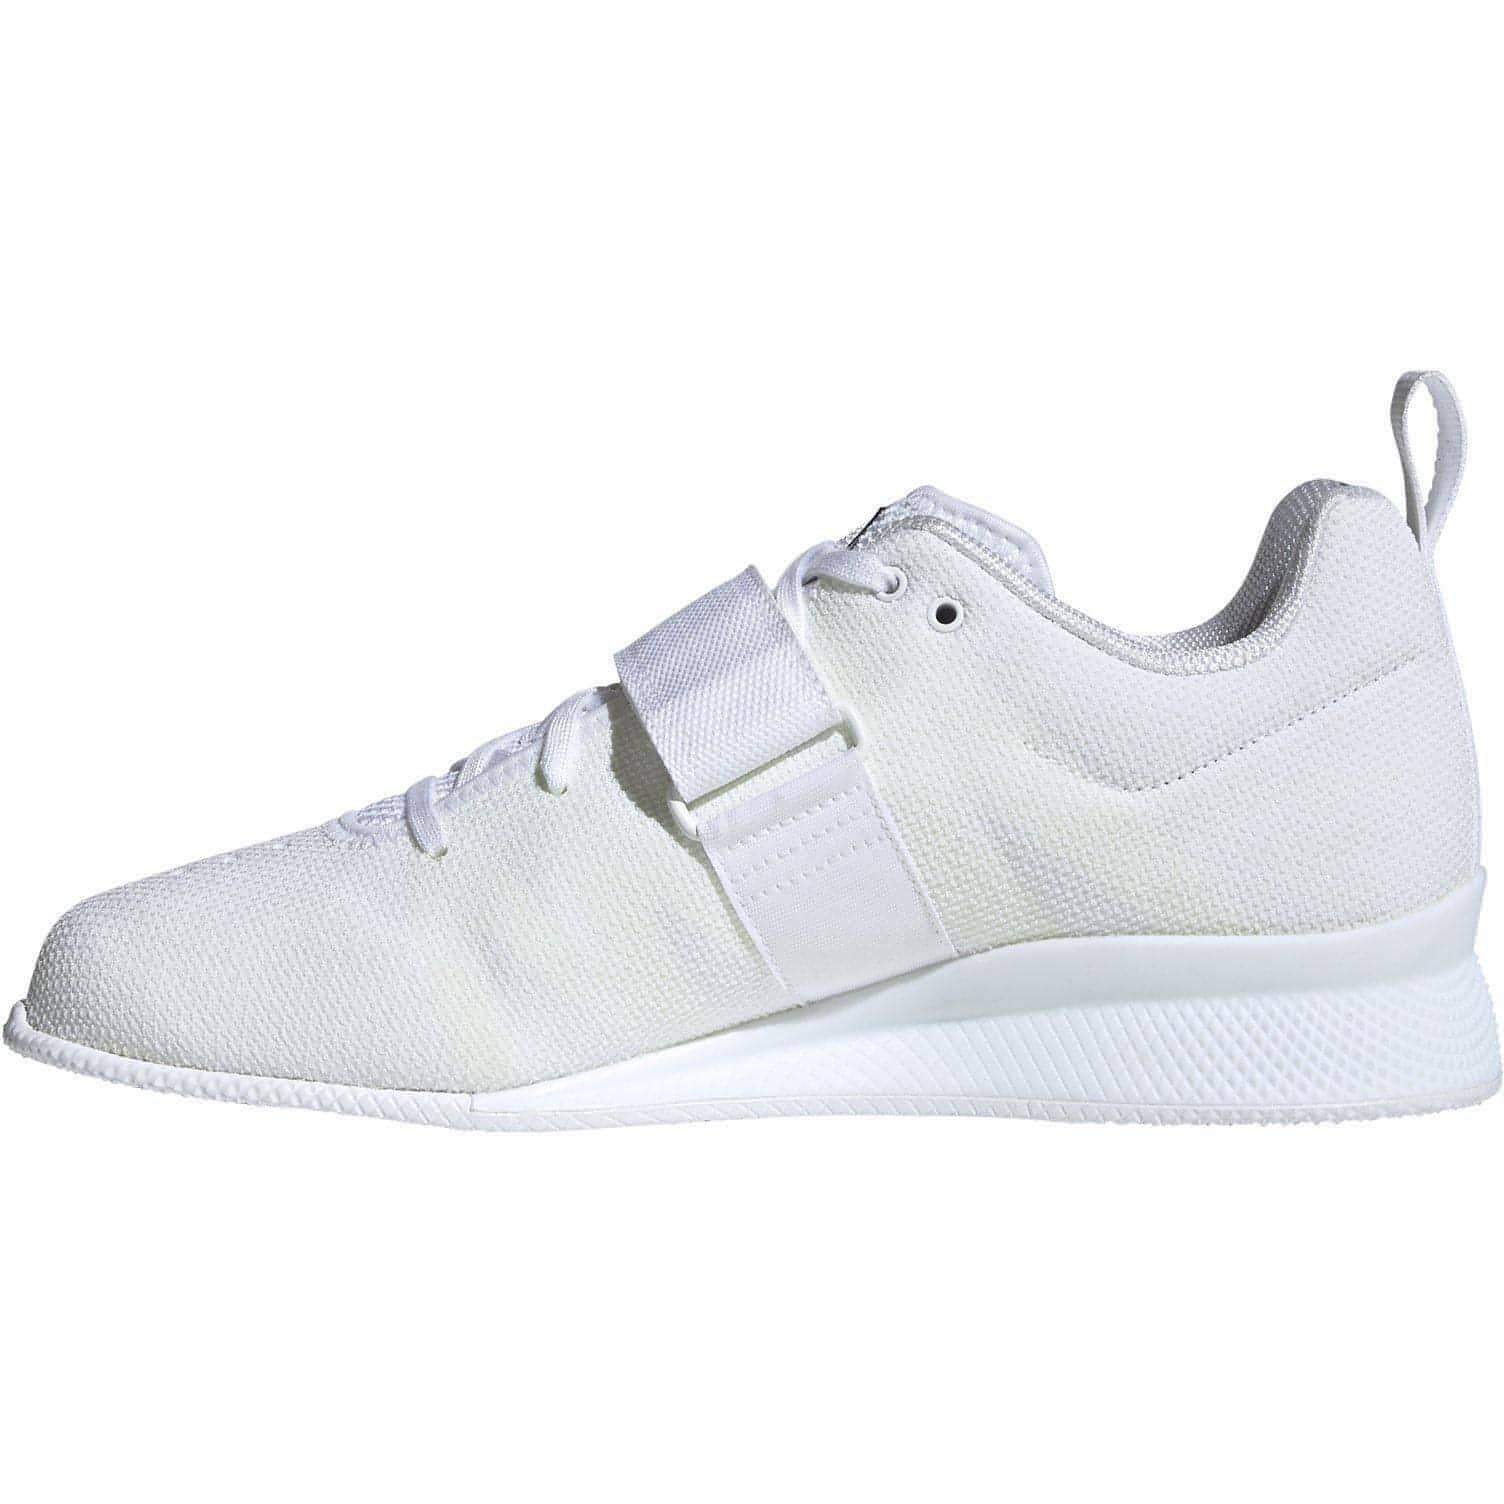 adidas Adipower 2 Weightlifting Shoes - White - Start Fitness